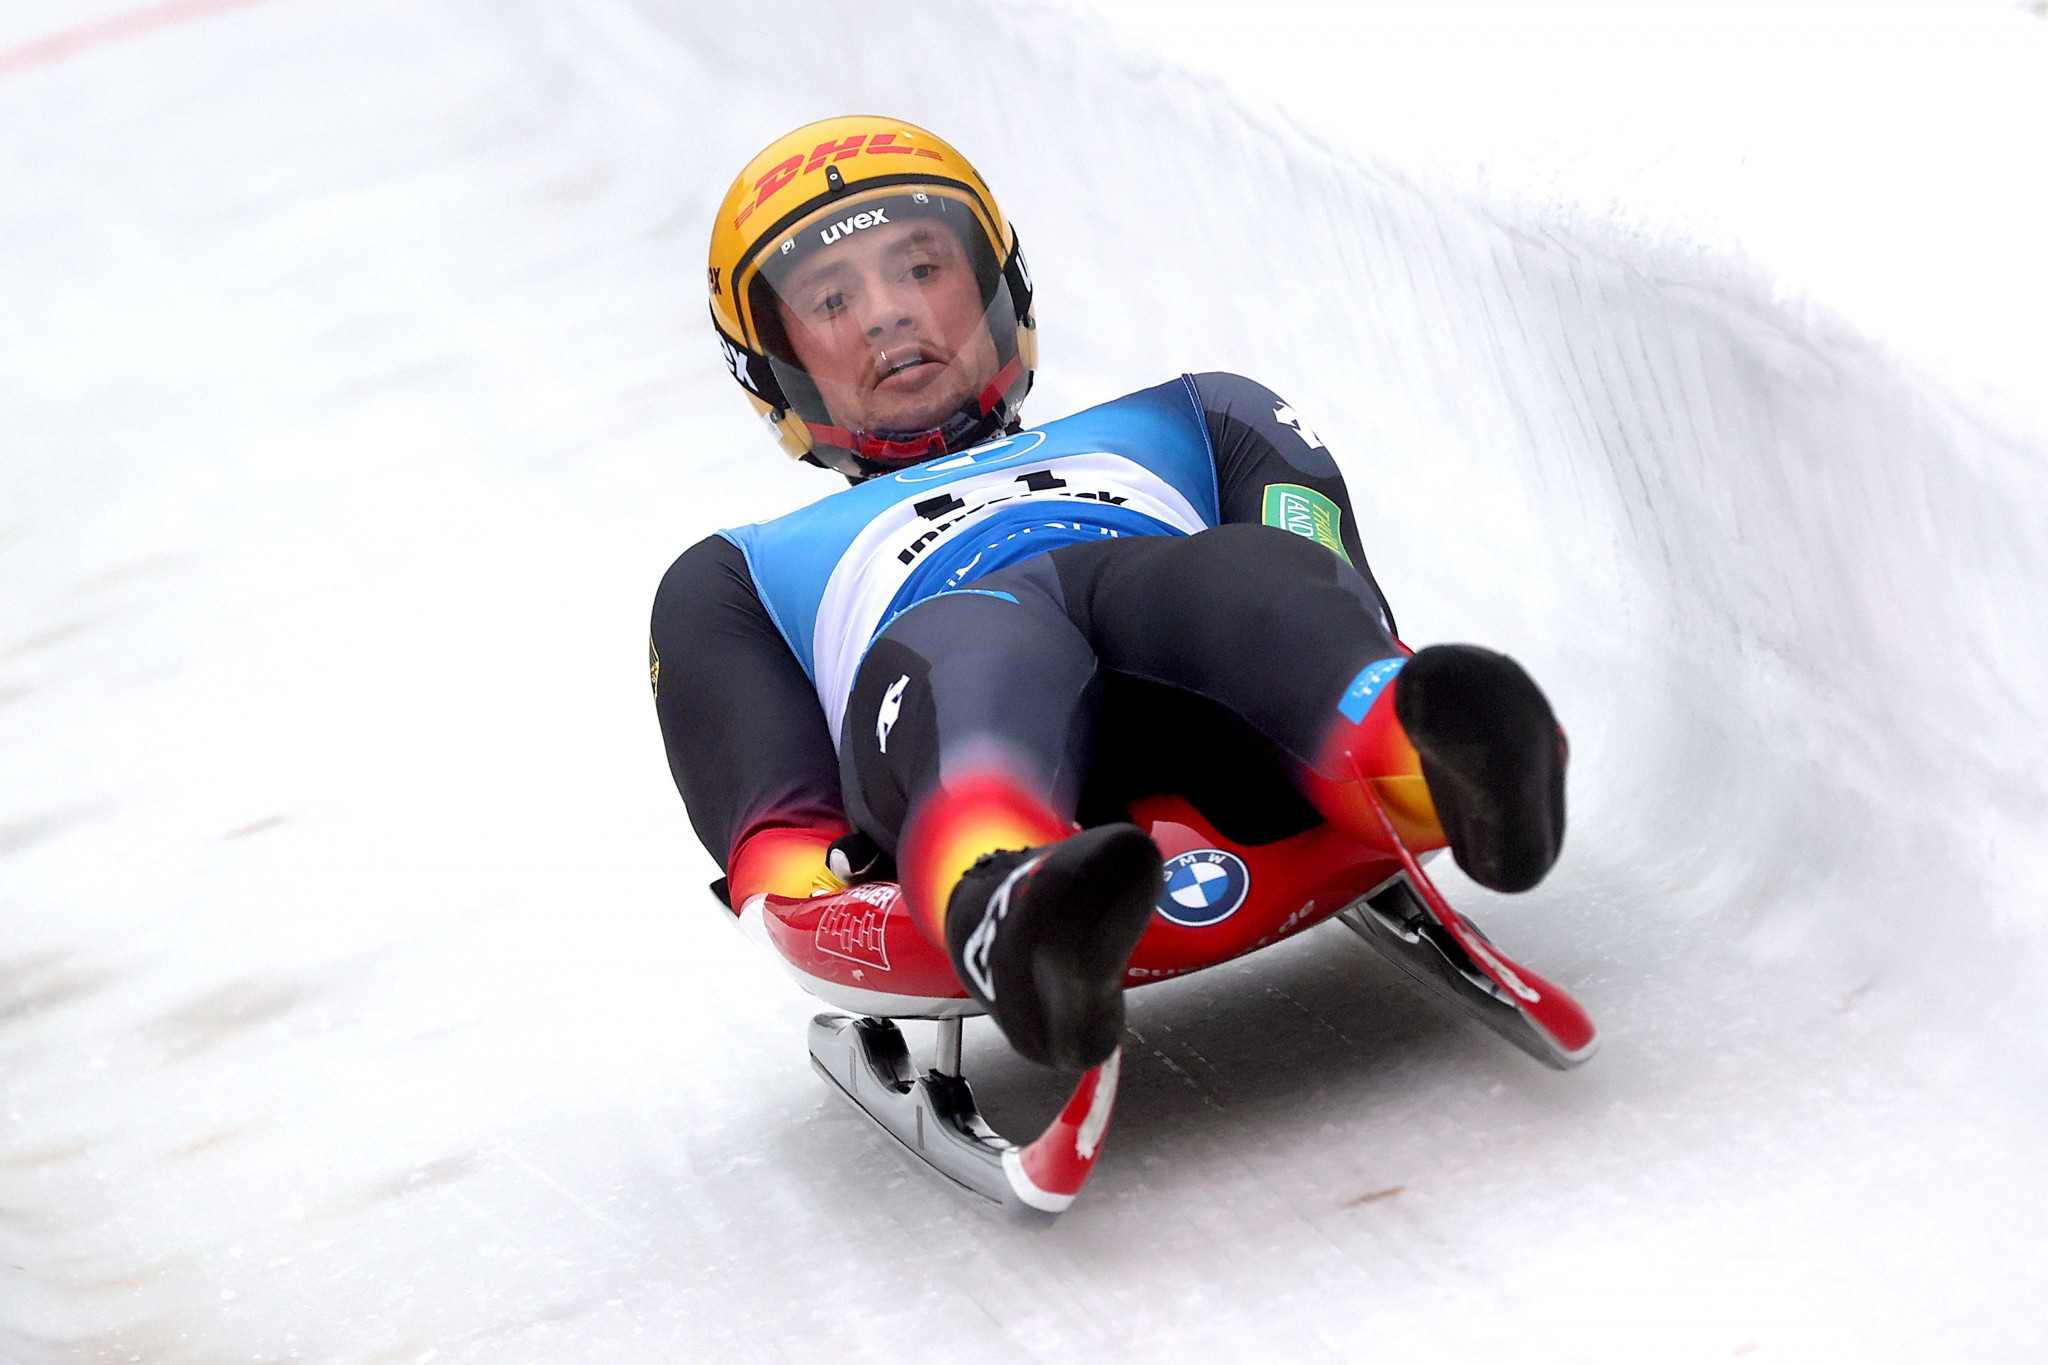 Ludwig eyes hat-trick of wins as Luge World Cup returns to Sochi